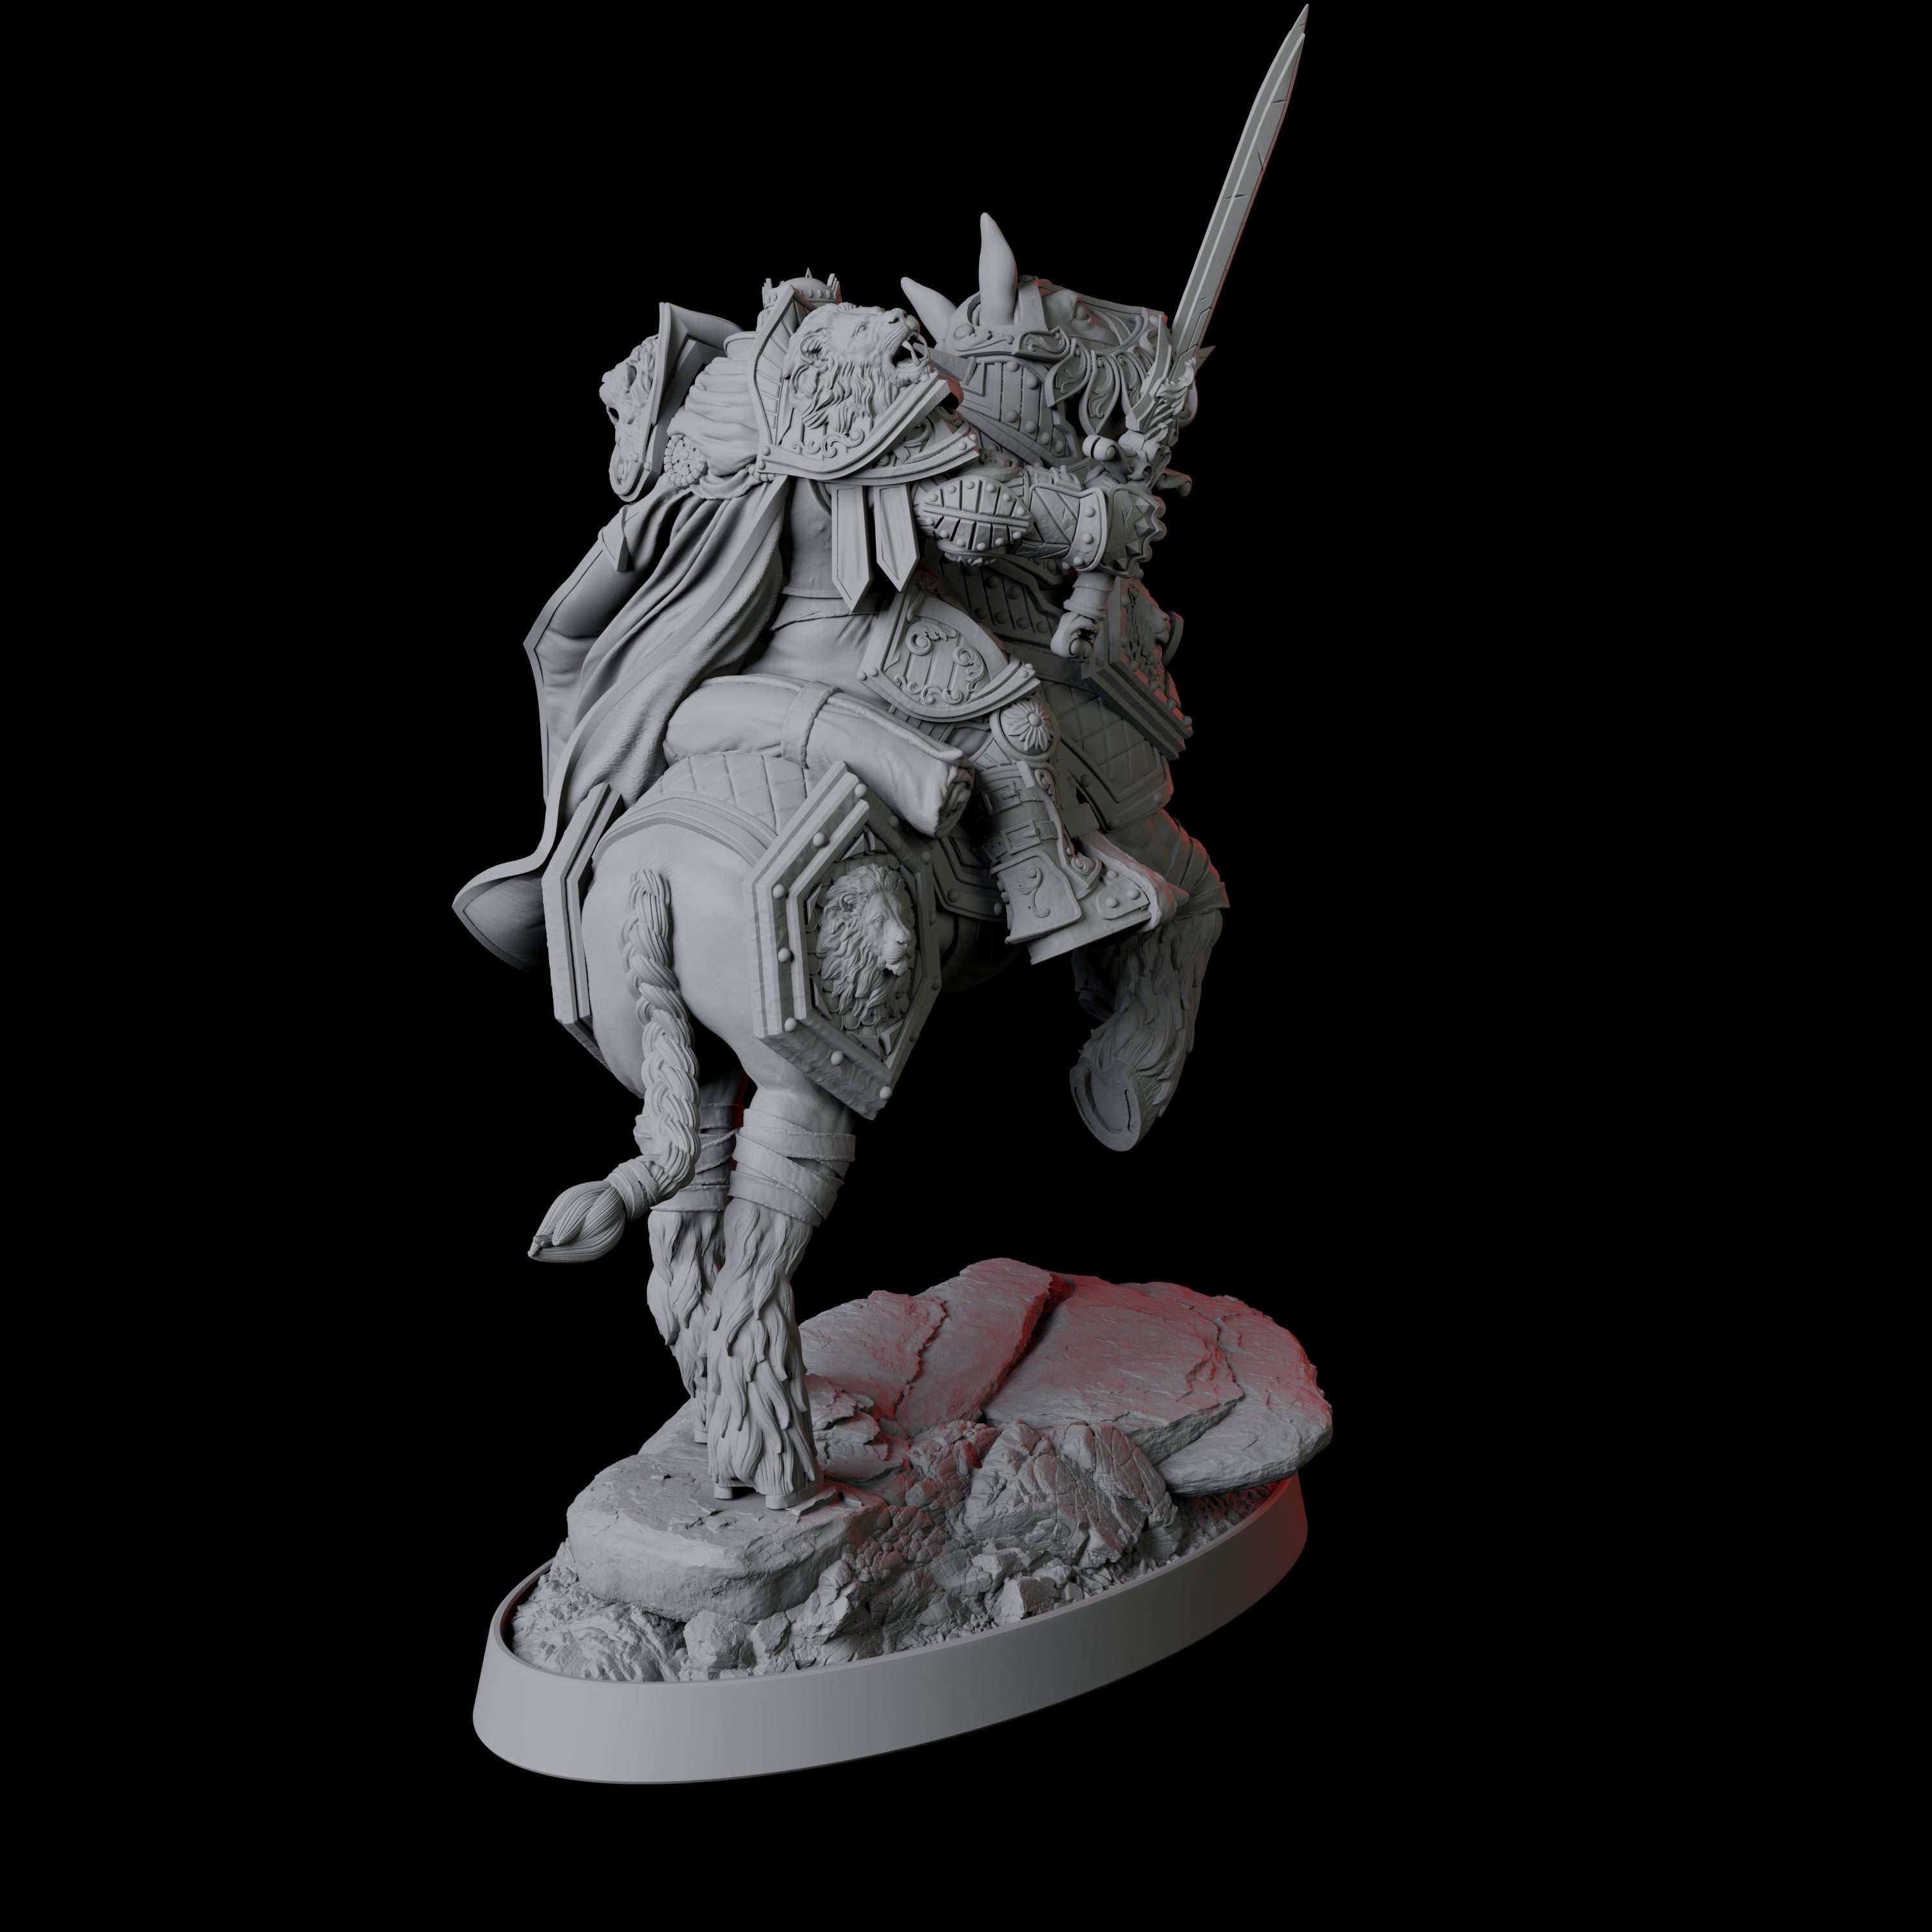 Paladin Knight on Rearing Horse Miniature for Dungeons and Dragons